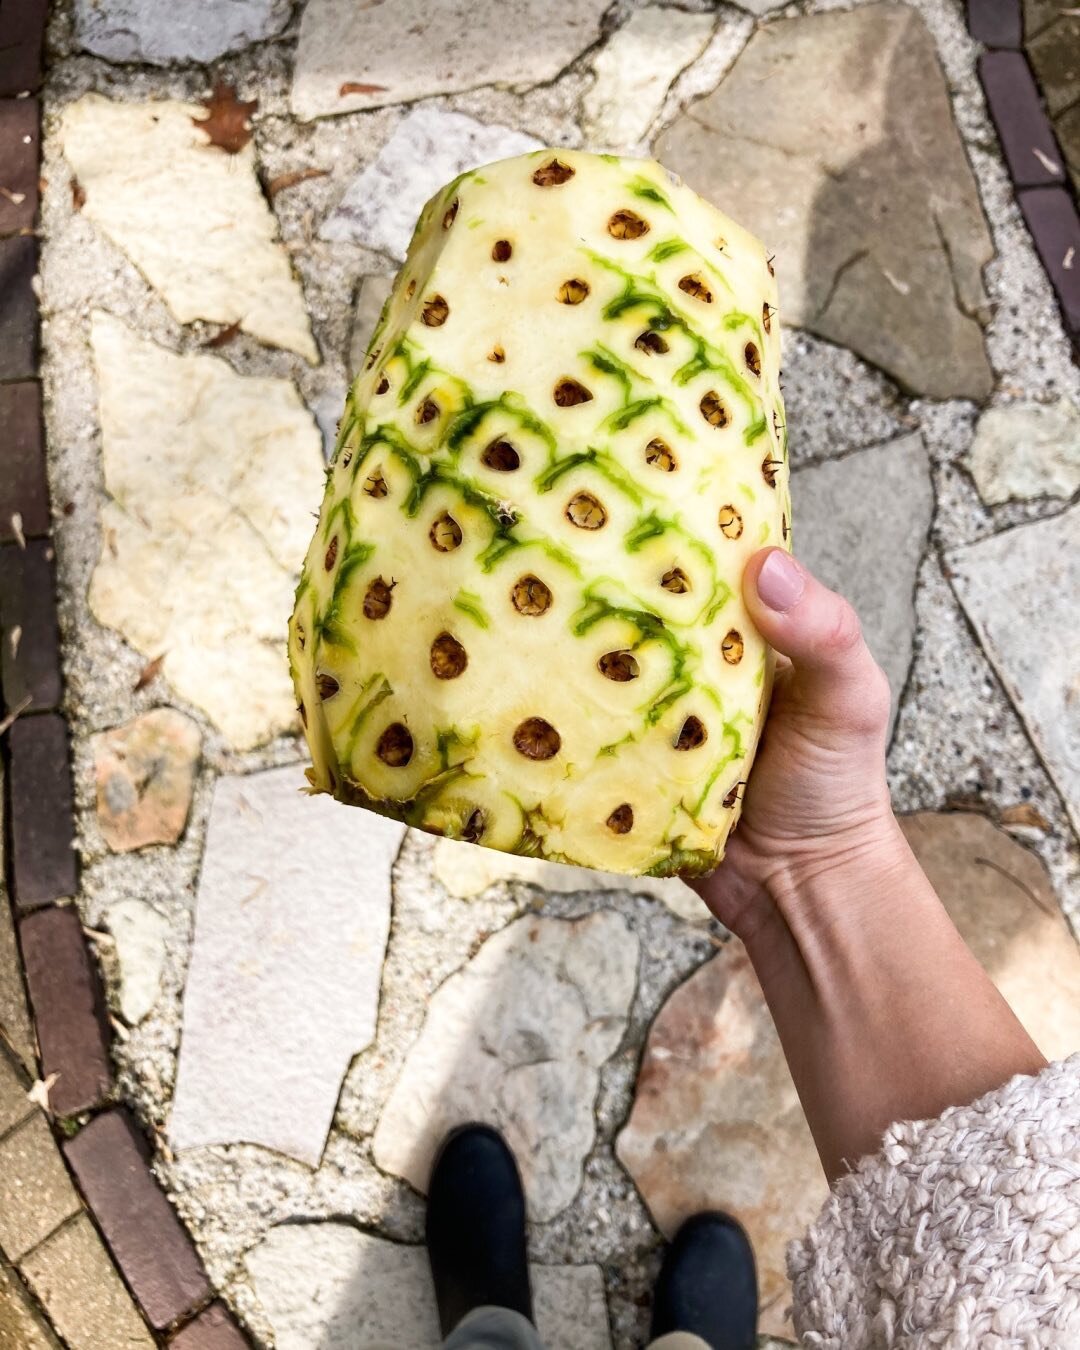 A pineapple a day might melt the snow away ☀️🍍

Anyone else ready for spring?